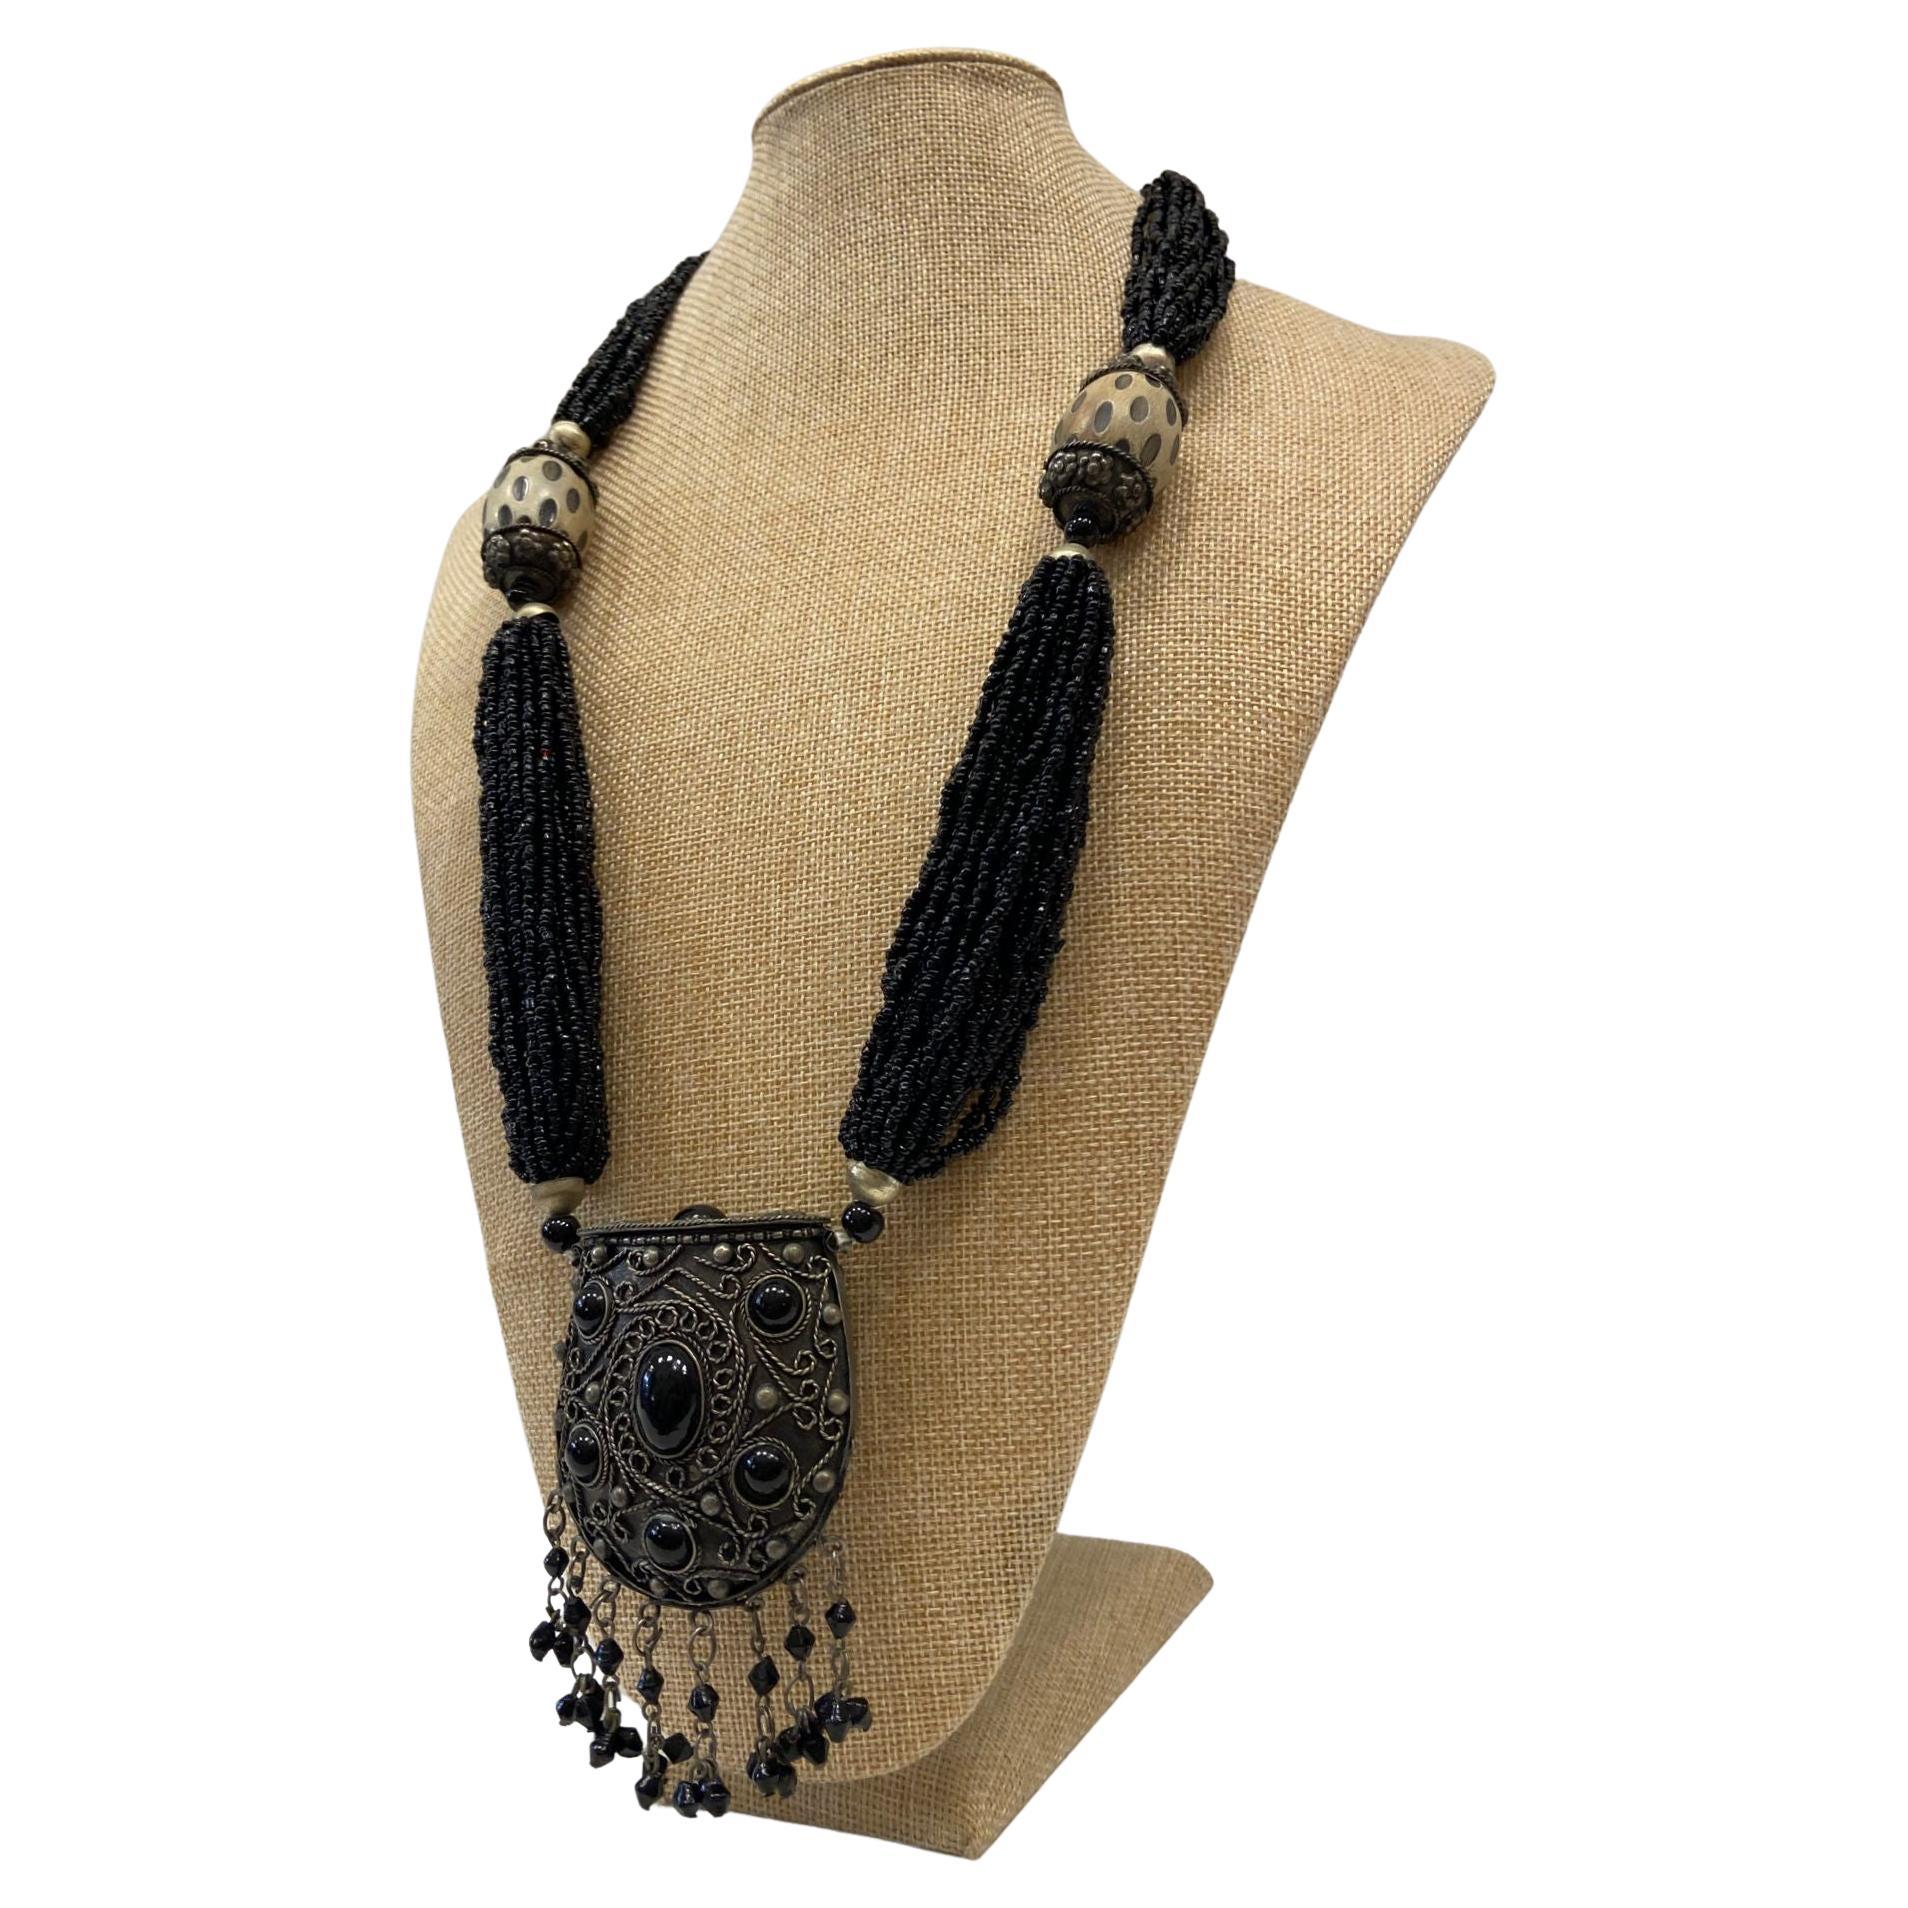 Tibetan necklace made of silver, onyx and bone, 50s